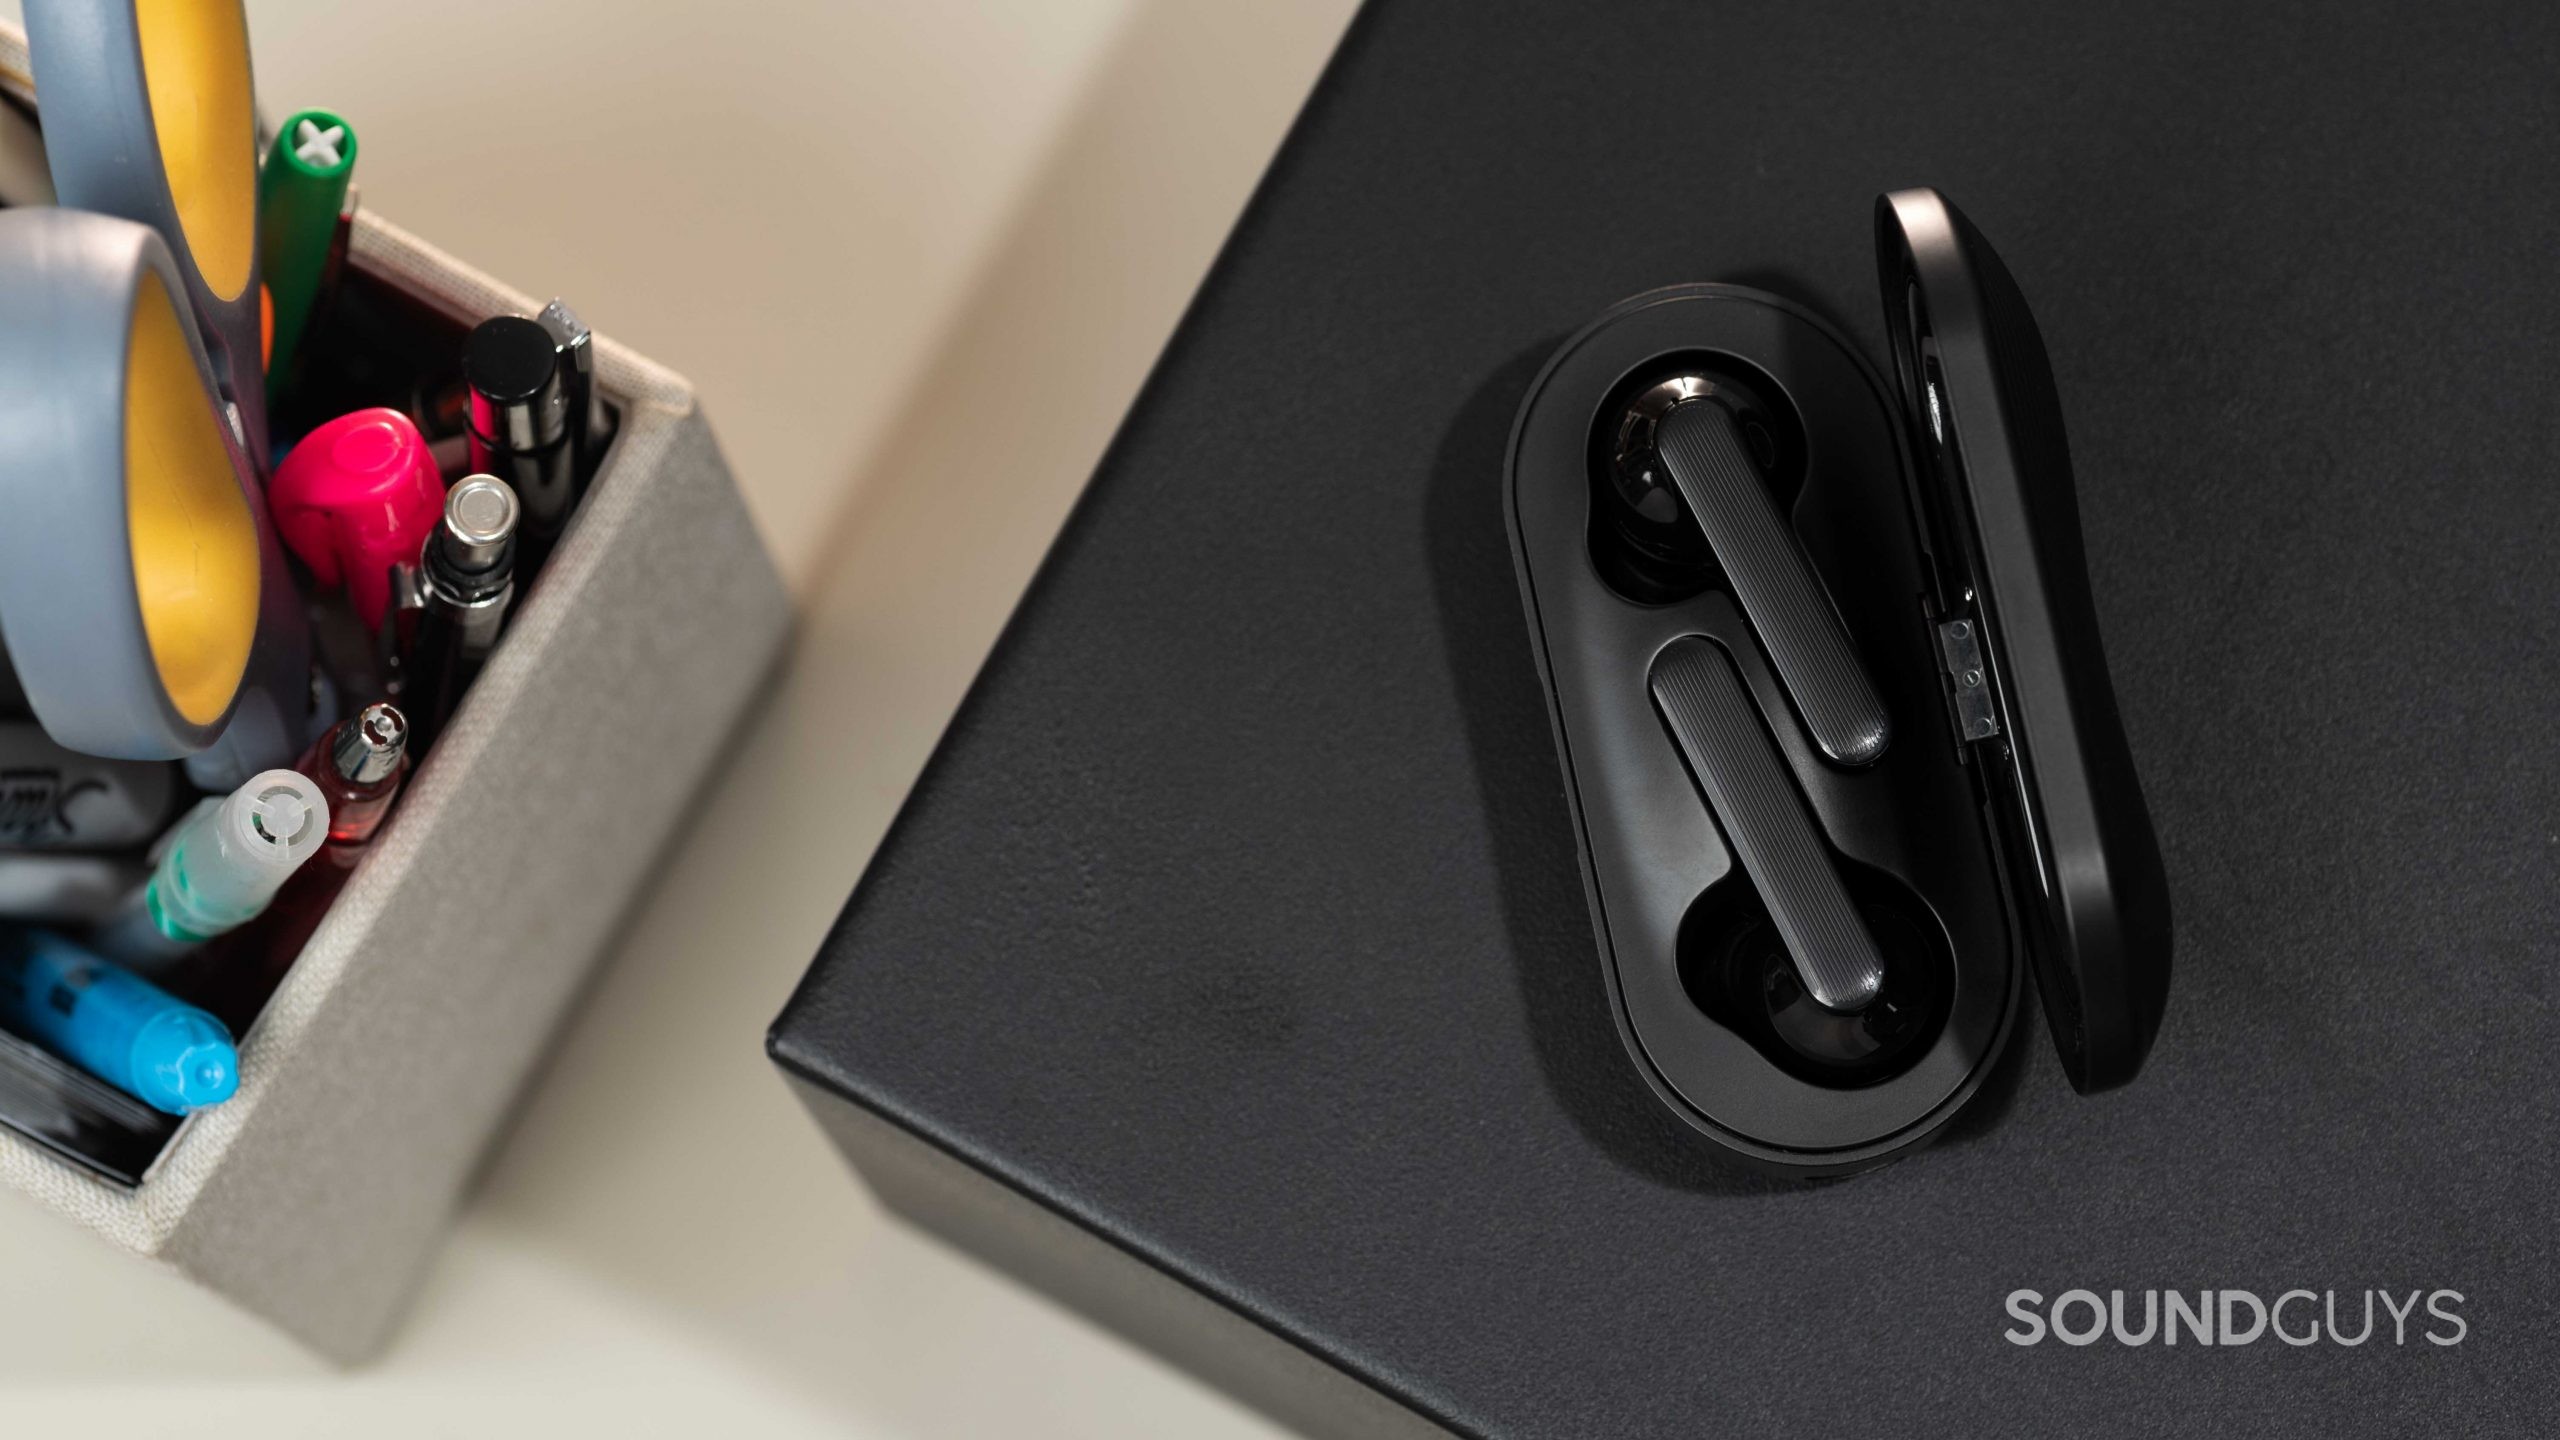 The Mobvoi Earbuds Gesture true wireless earbuds rest inside the USB-C charging case next to a pen holder full of colorful pens and office tools.